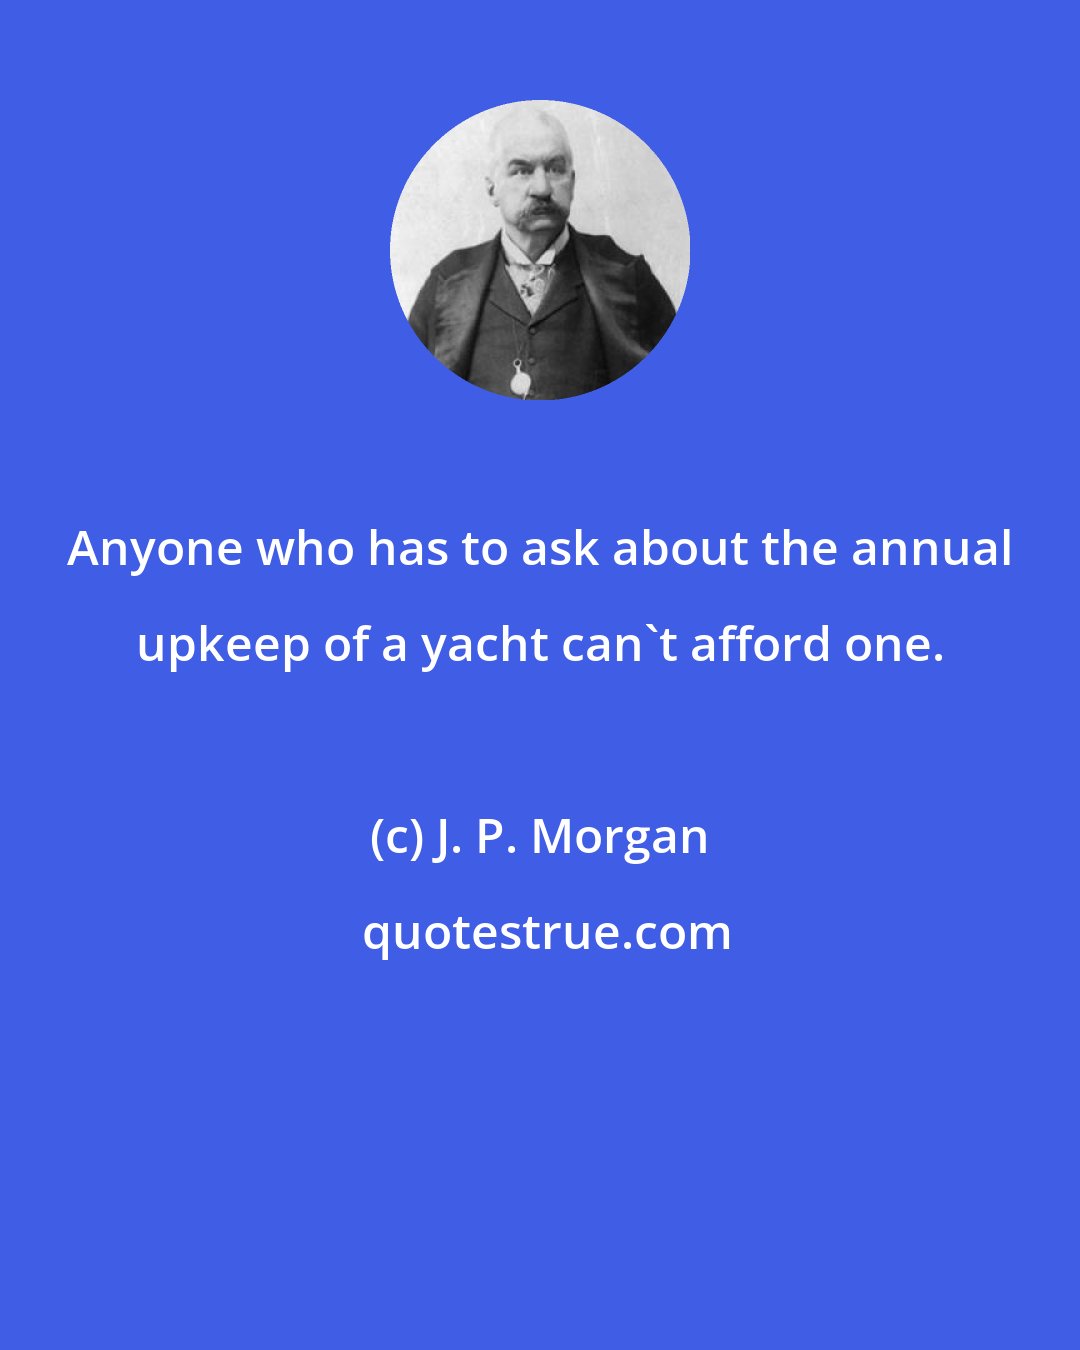 J. P. Morgan: Anyone who has to ask about the annual upkeep of a yacht can't afford one.